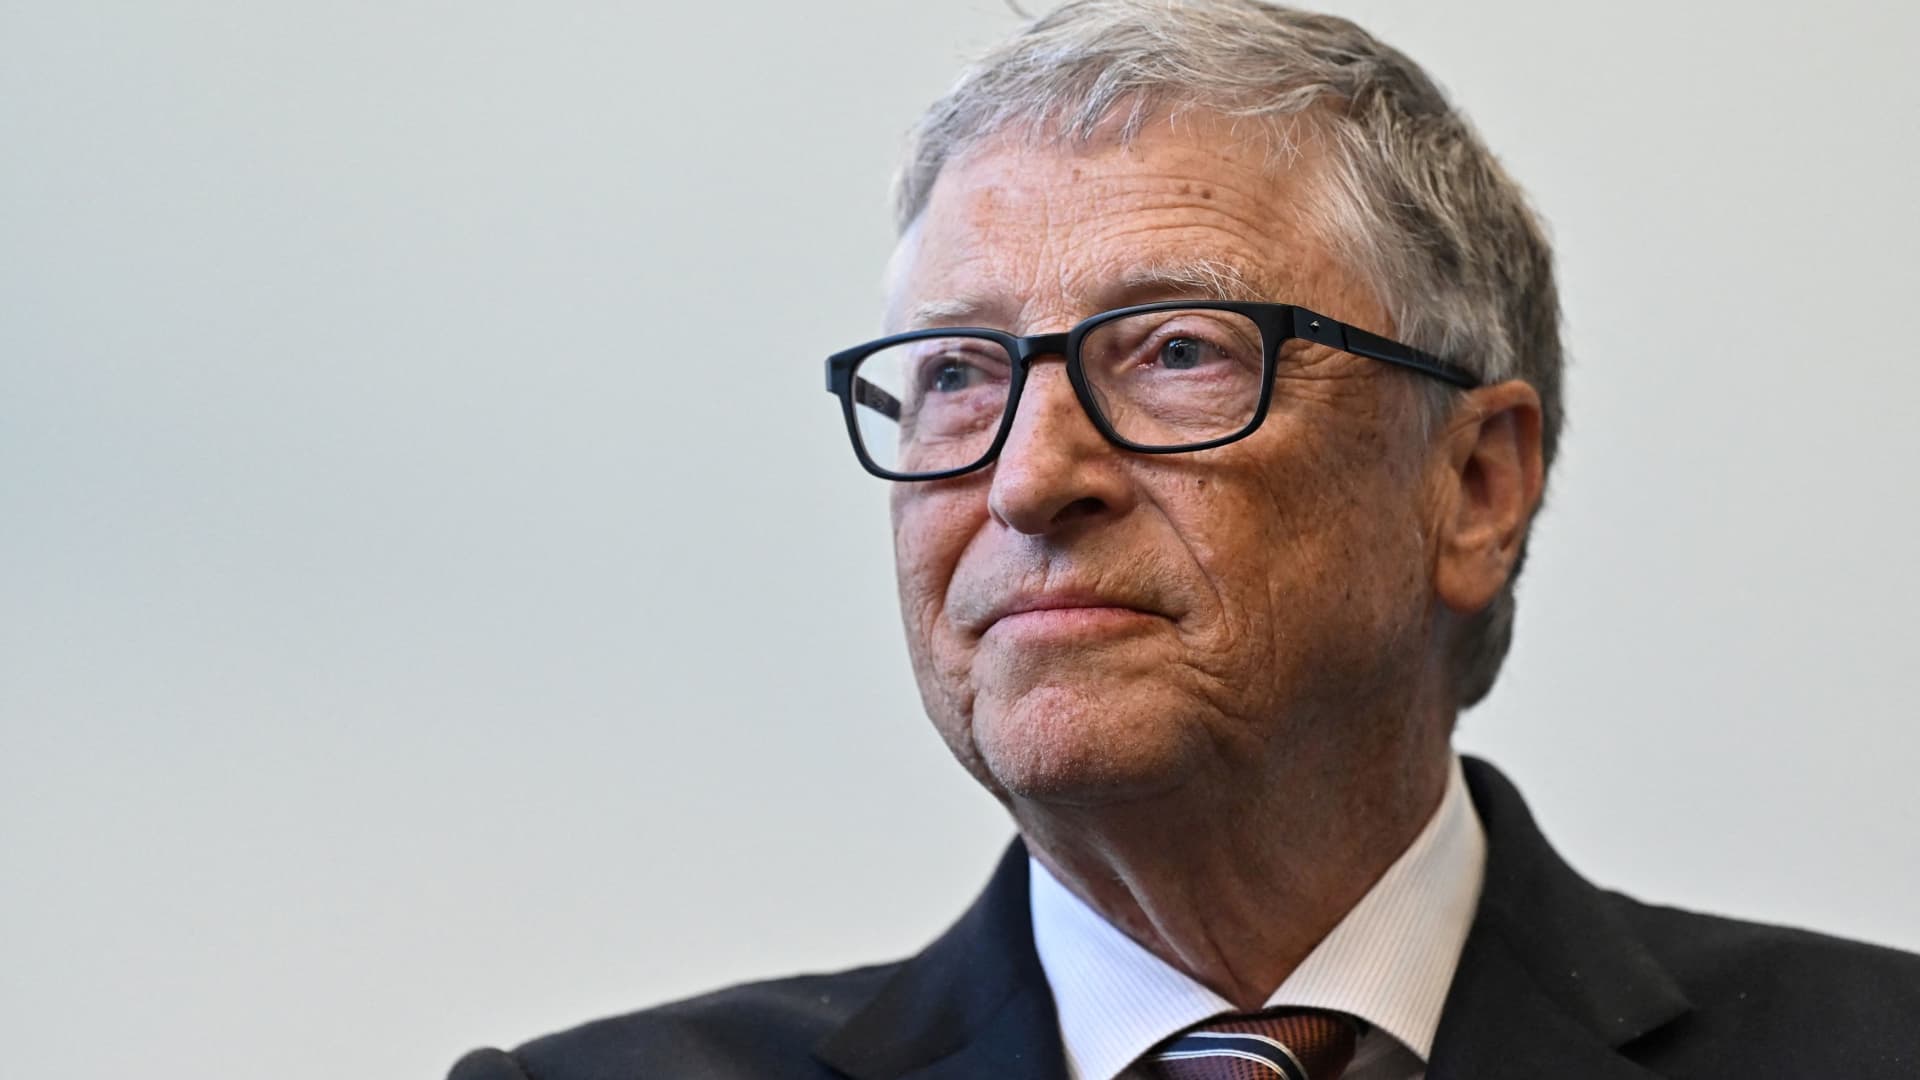 Microsoft     co-founder Bill Gates believes the future top company in artificial intelligence will likely have created a personal digital agent that 